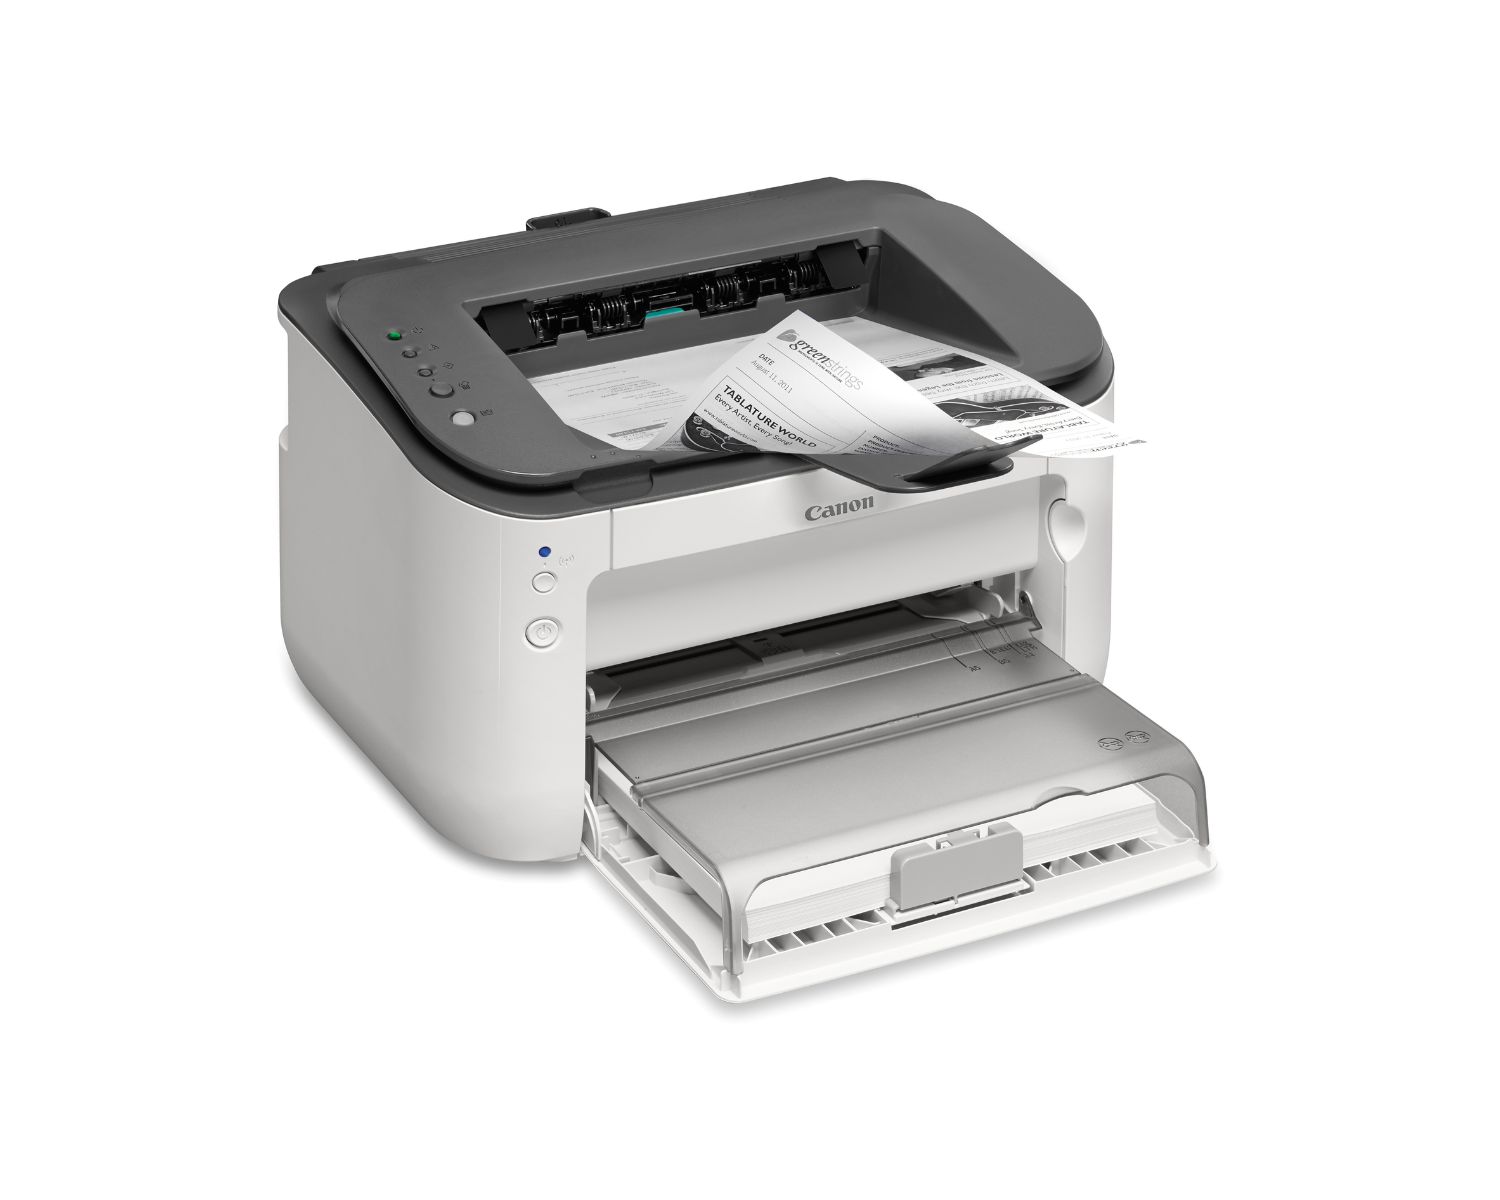 How To Make Canon Printer Print Without Color Cartridge